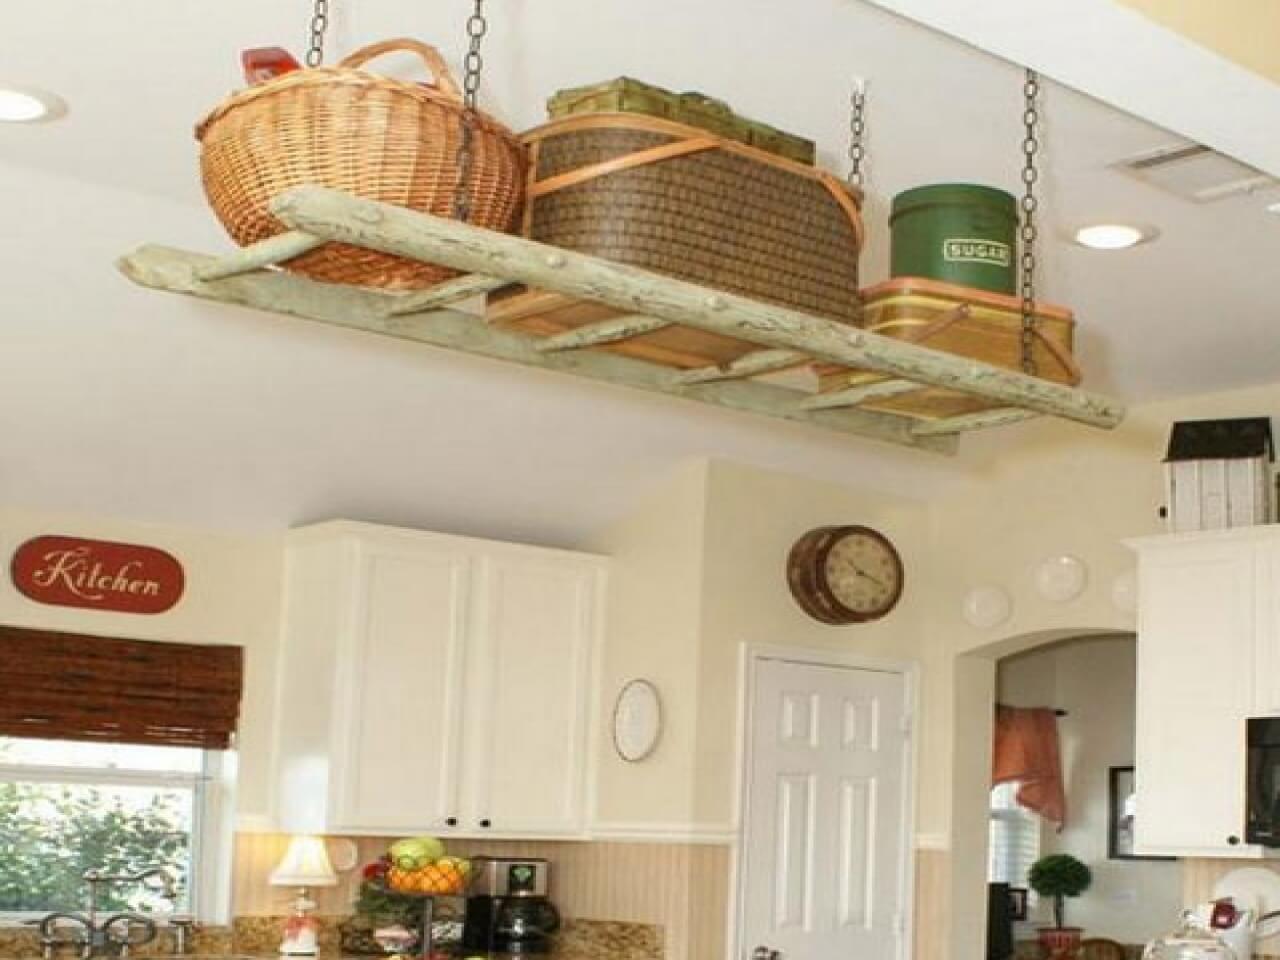 Storage Ladder that Dangles from the Ceiling